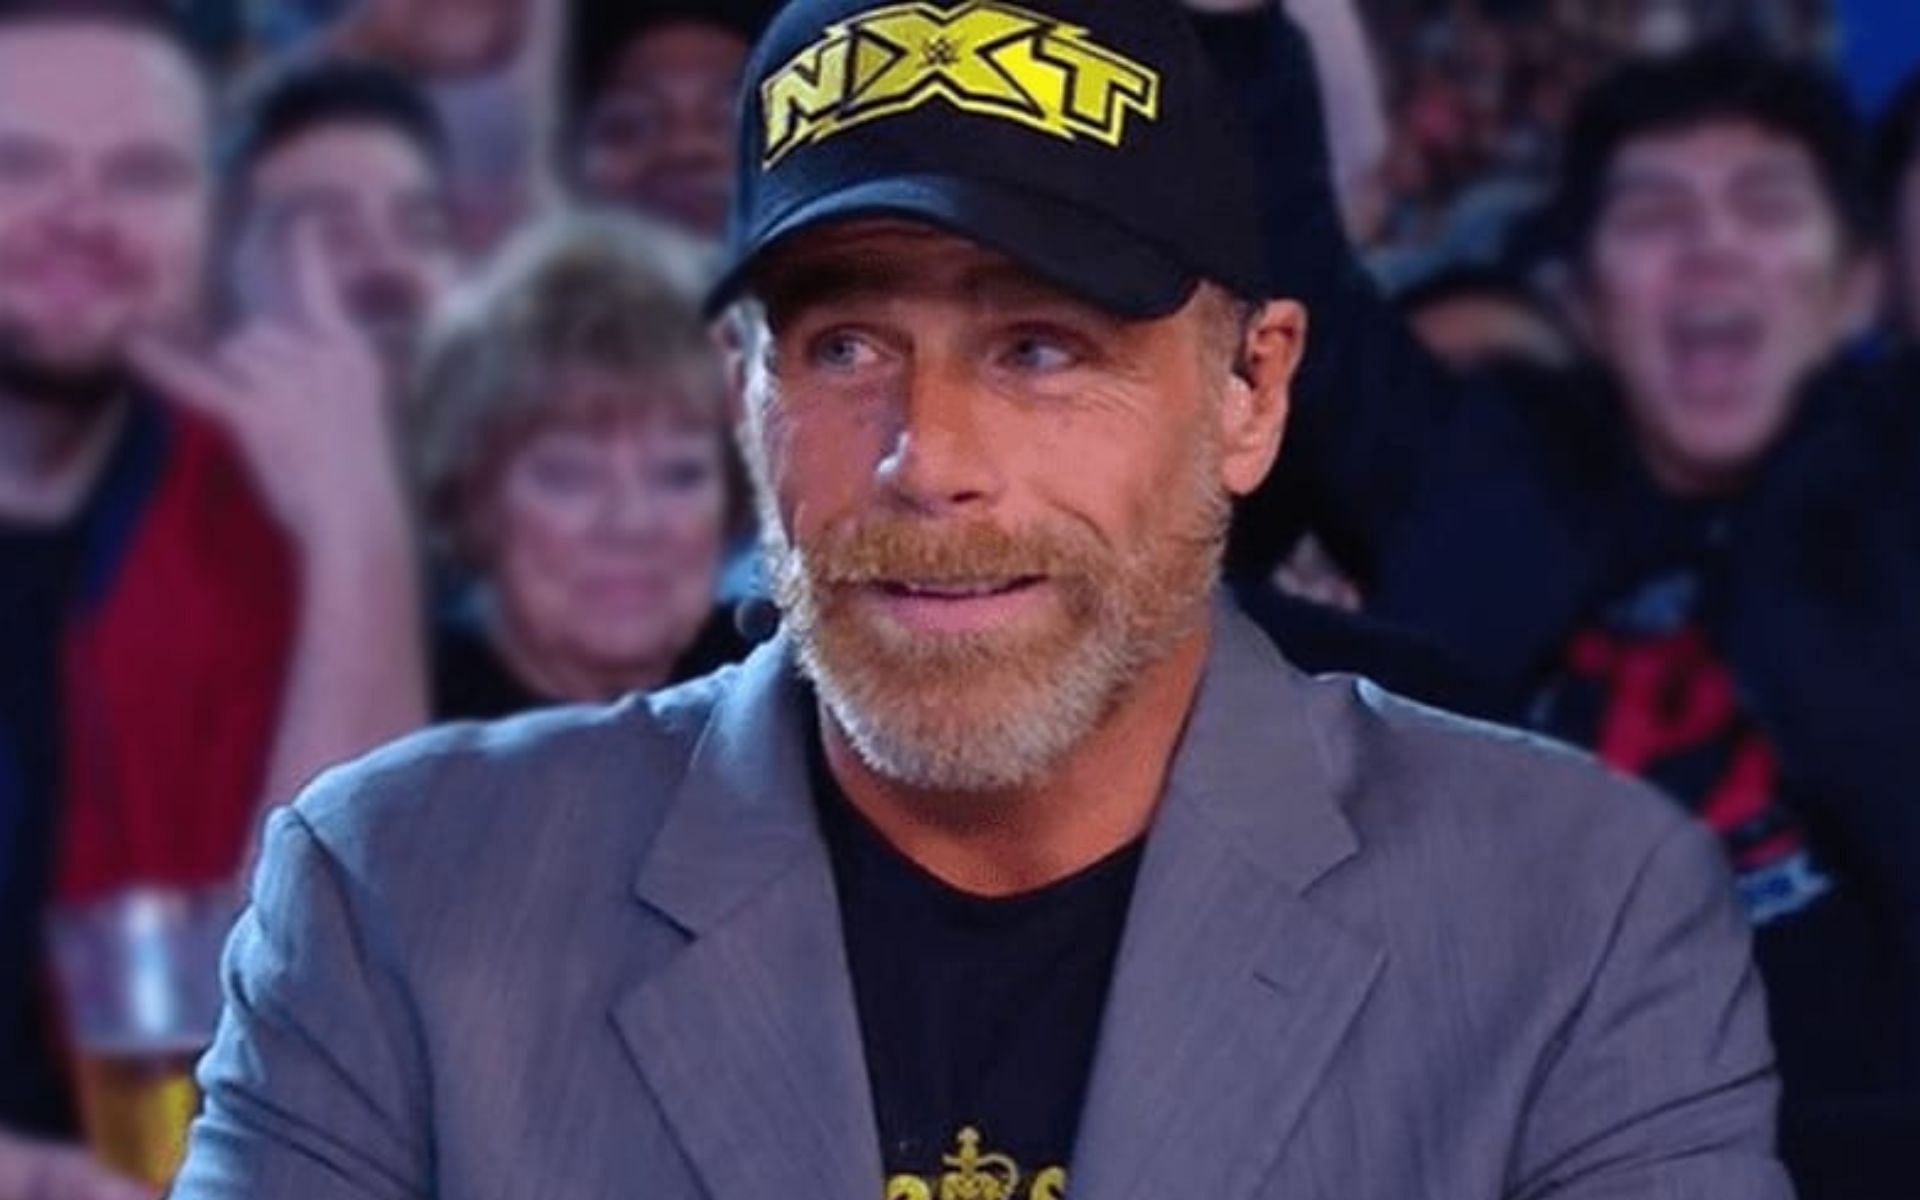 The WWE Hall of Famer has been the head of all things NXT